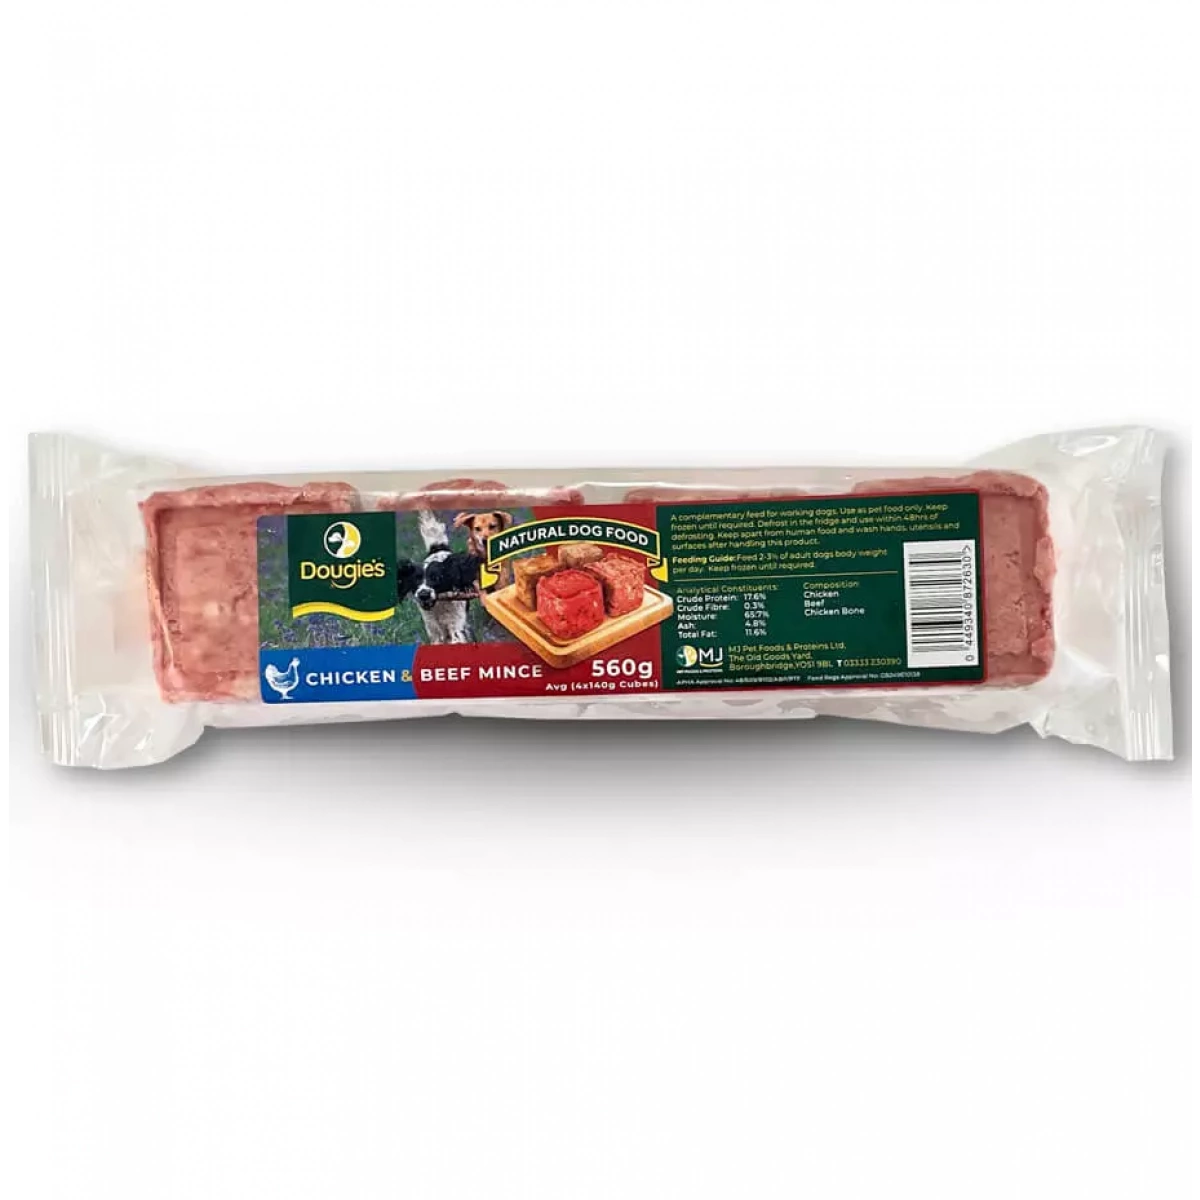 Dougie’s – Chicken & Beef Mince 140g – Pawfect Supplies Ltd Product Image